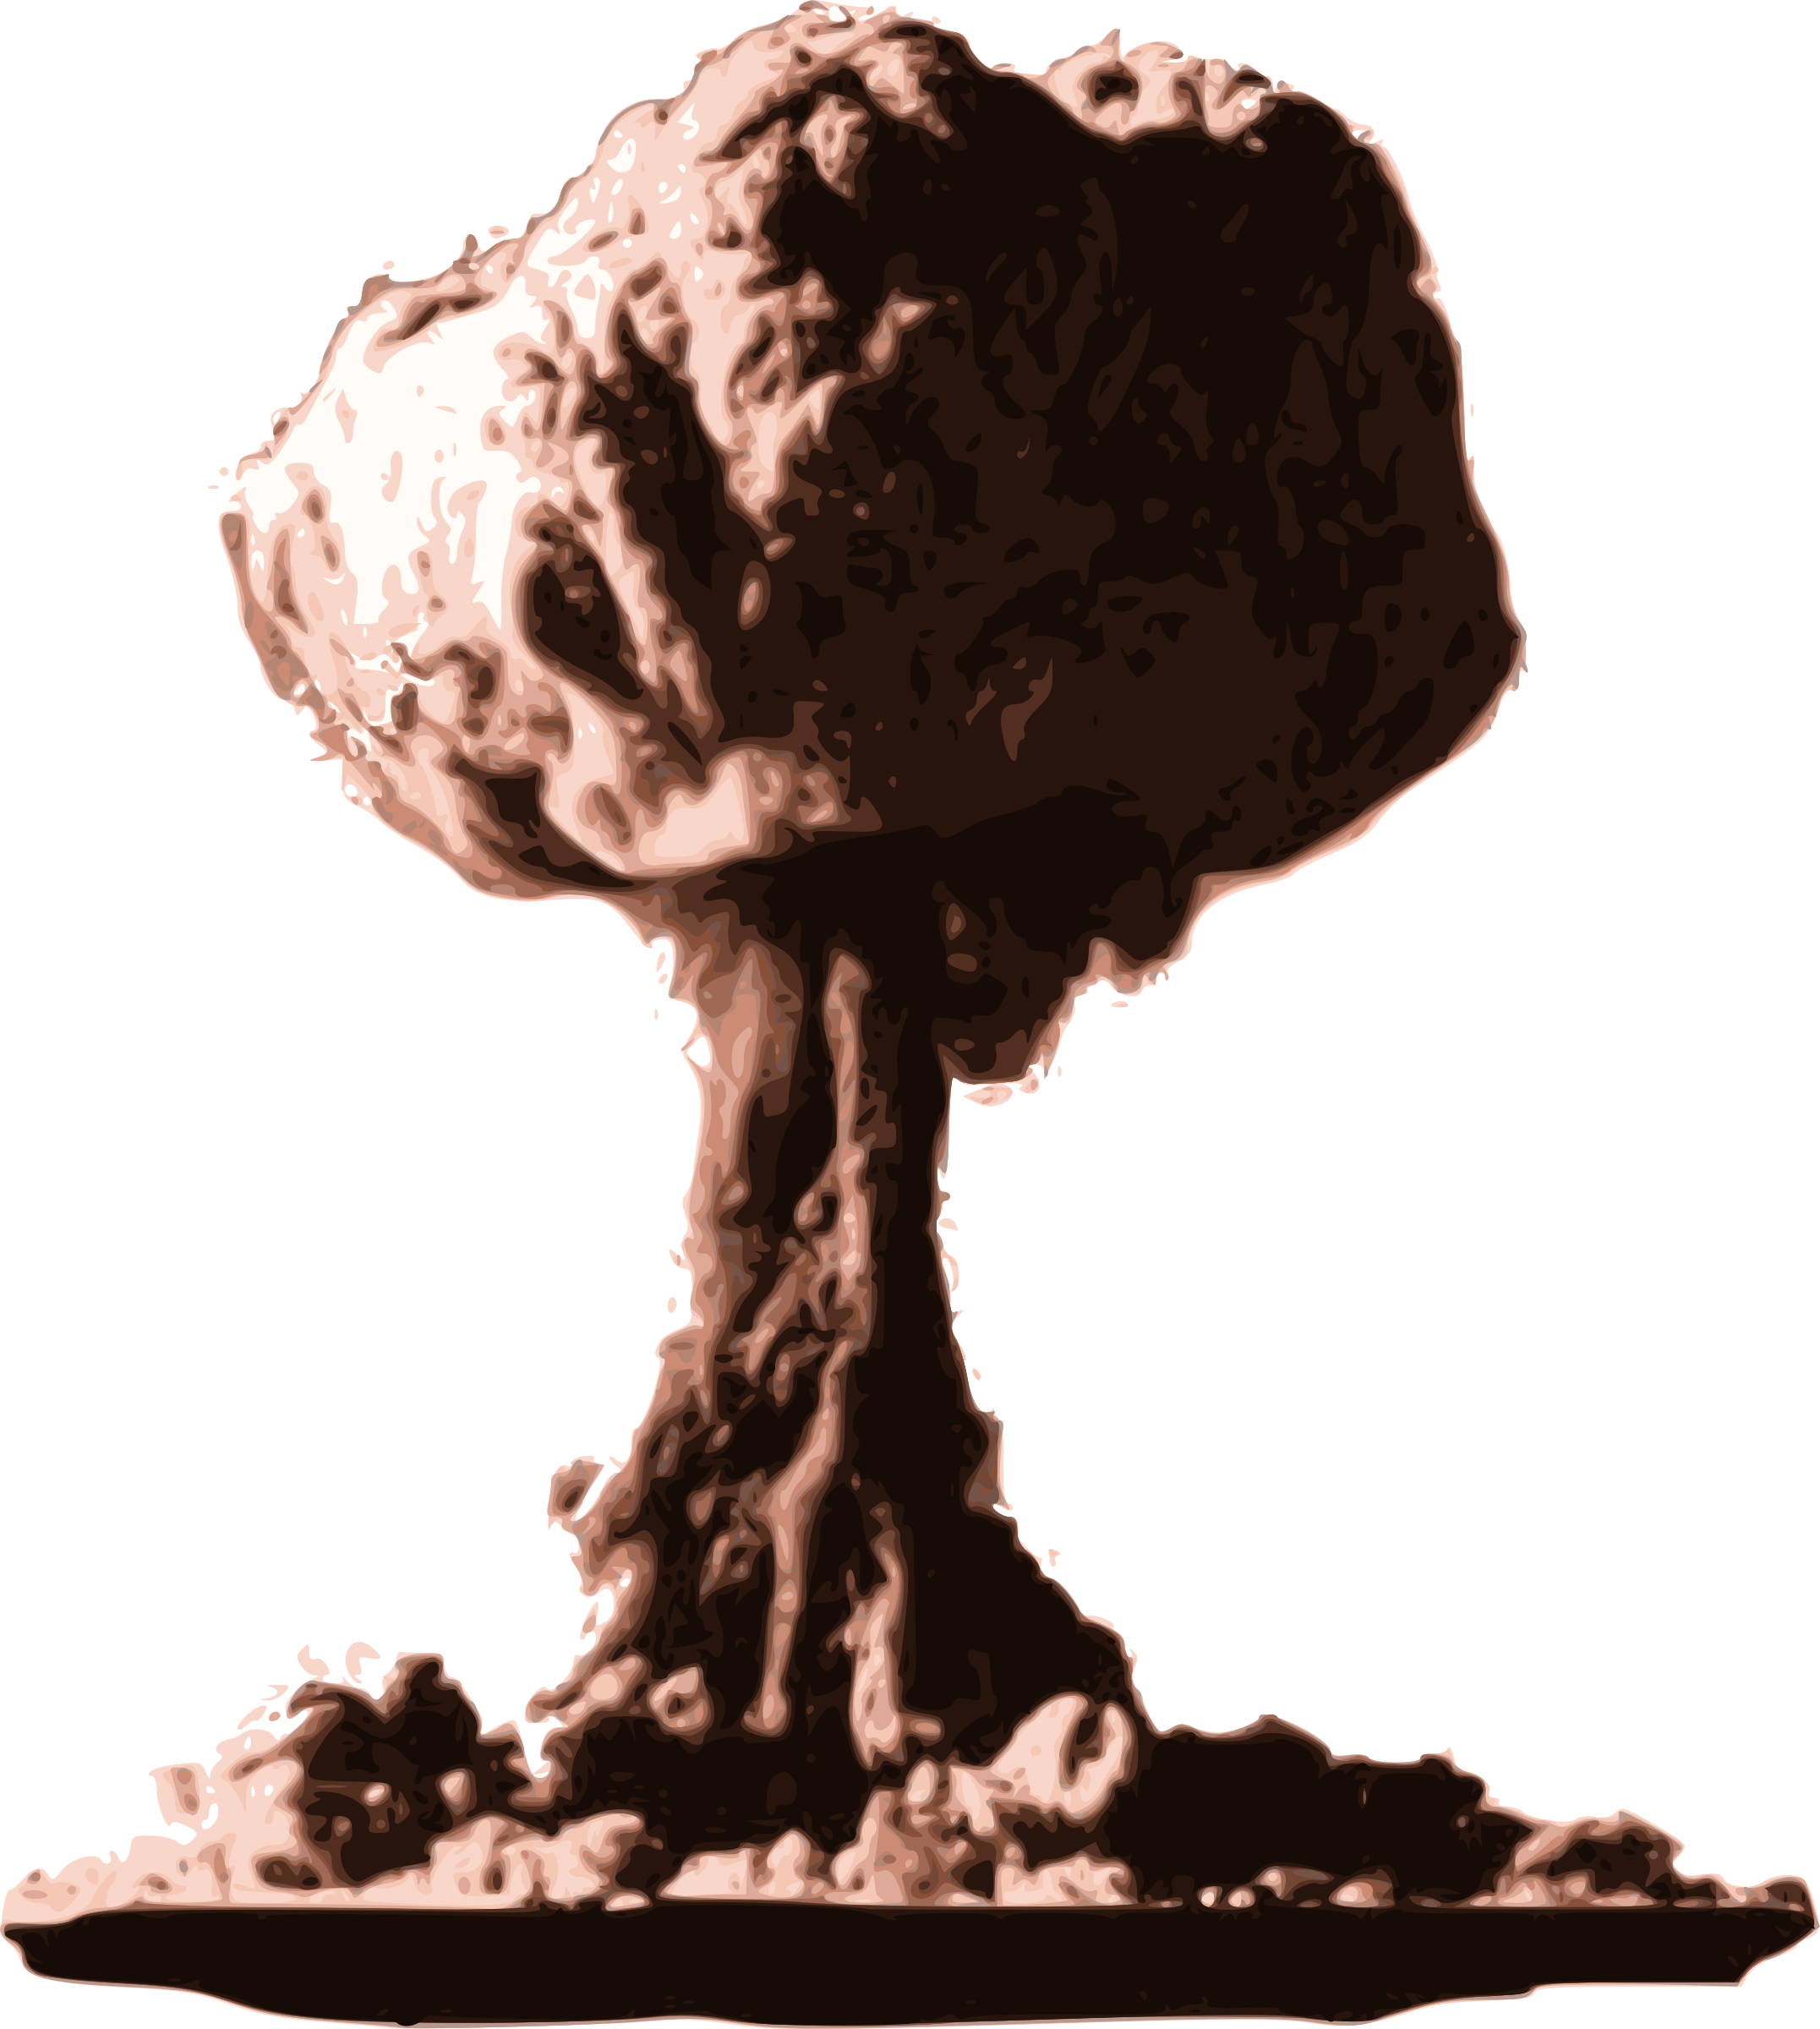 Nuclear Explosion Blast PNG Image File